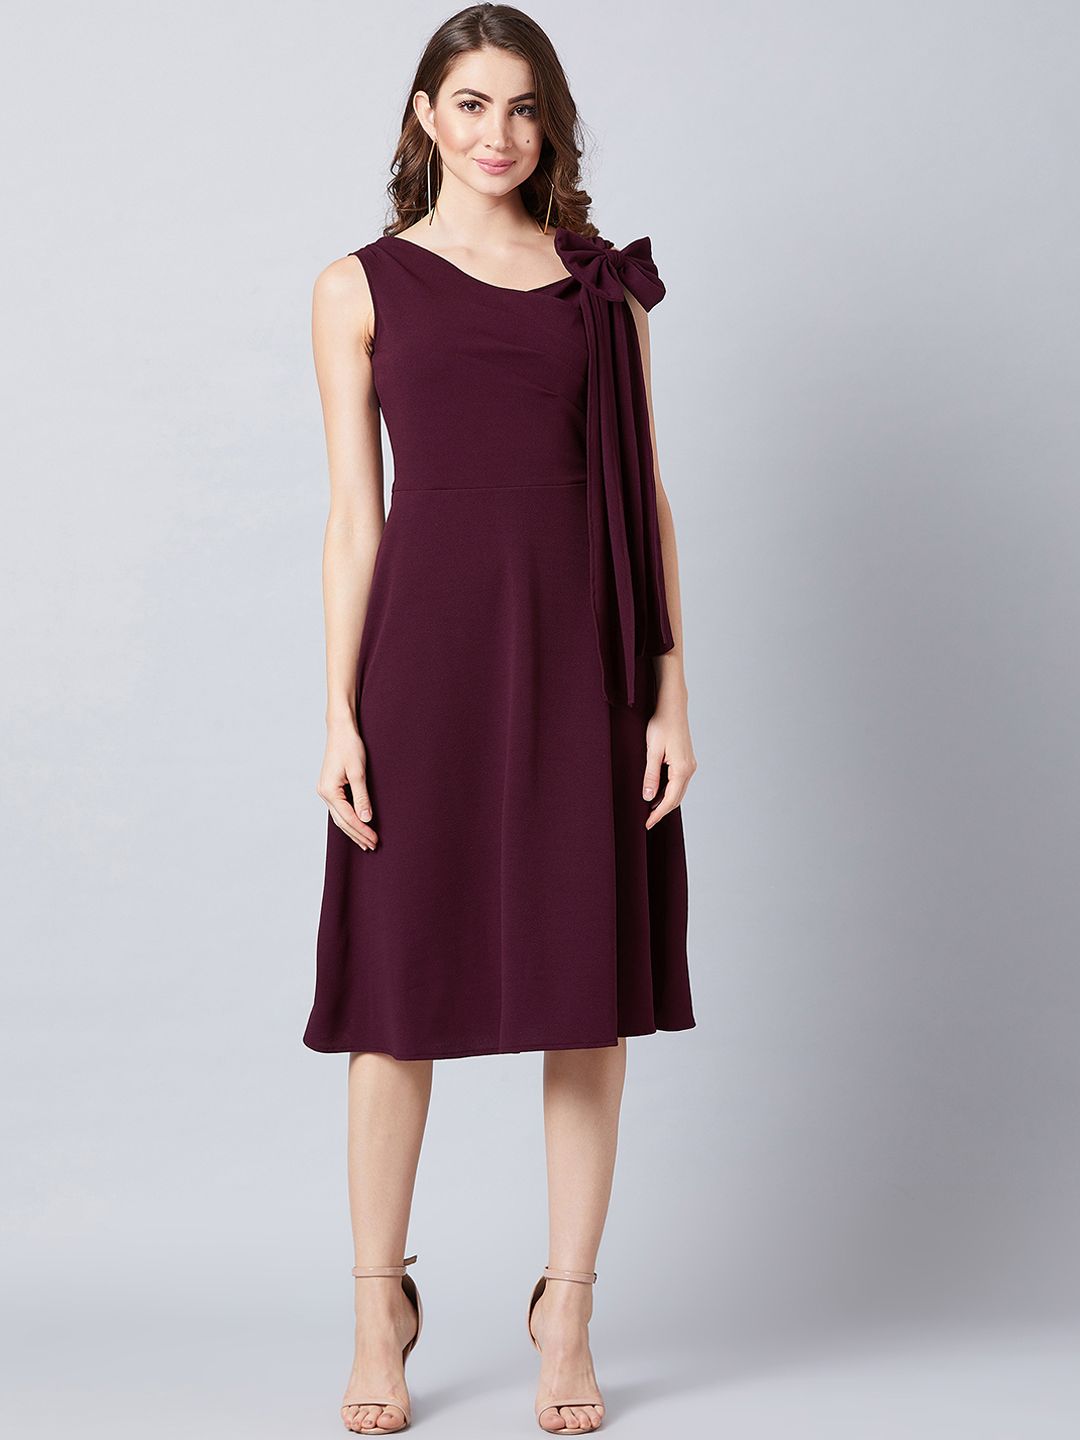 Athena Women Burgundy Solid Fit and Flare Dress Price in India